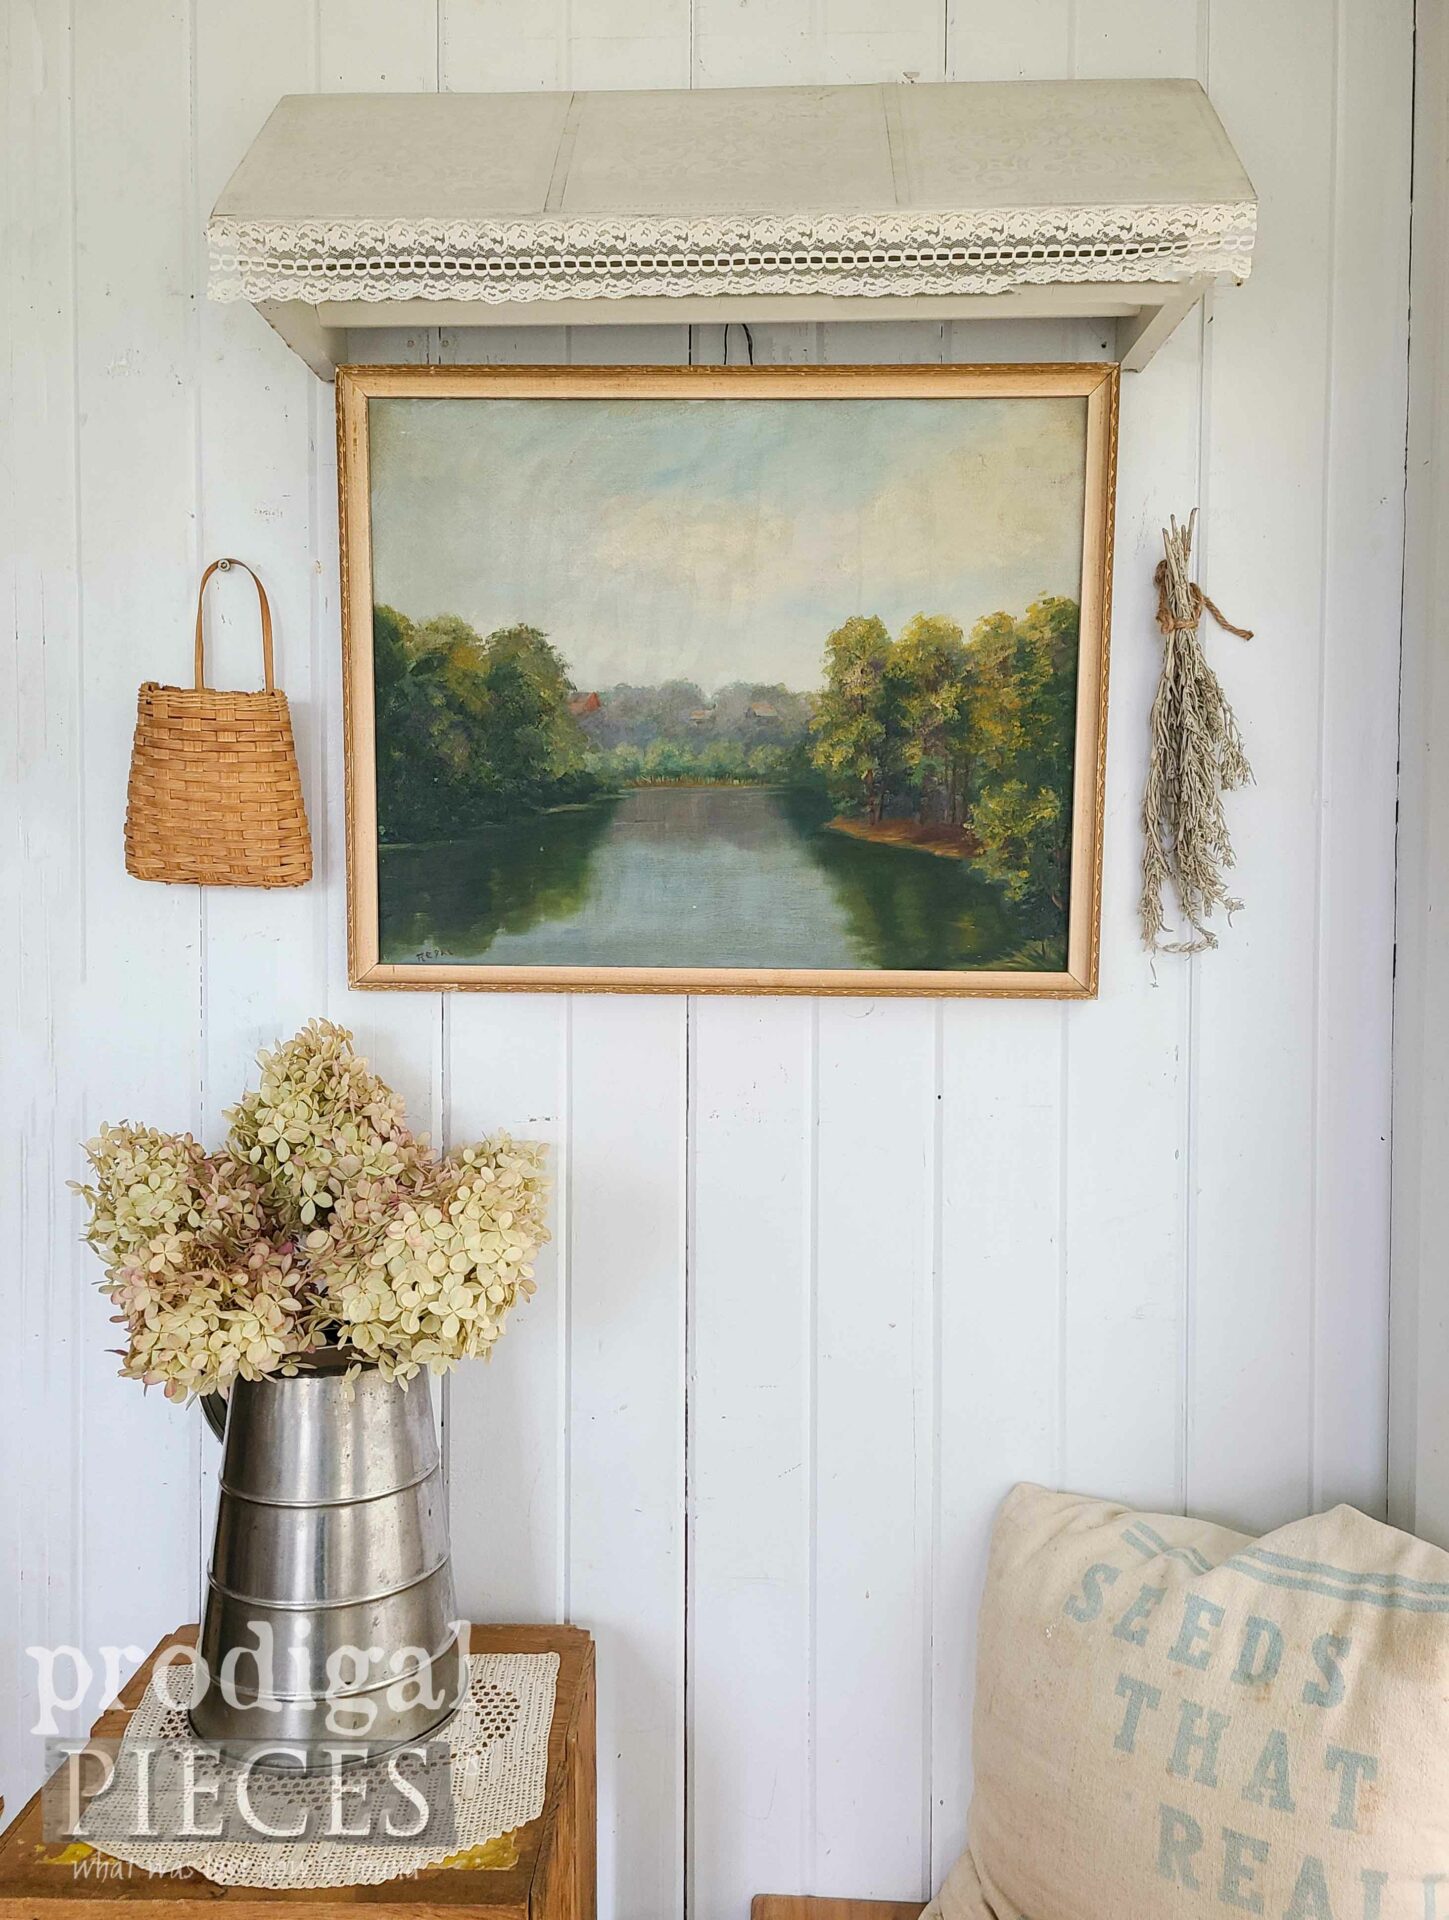 Create a DIY farmhouse tin tile awning by dollar store finds by Larissa of Prodigal Pieces | prodigalpieces.com #prodigalpieces #tutorial